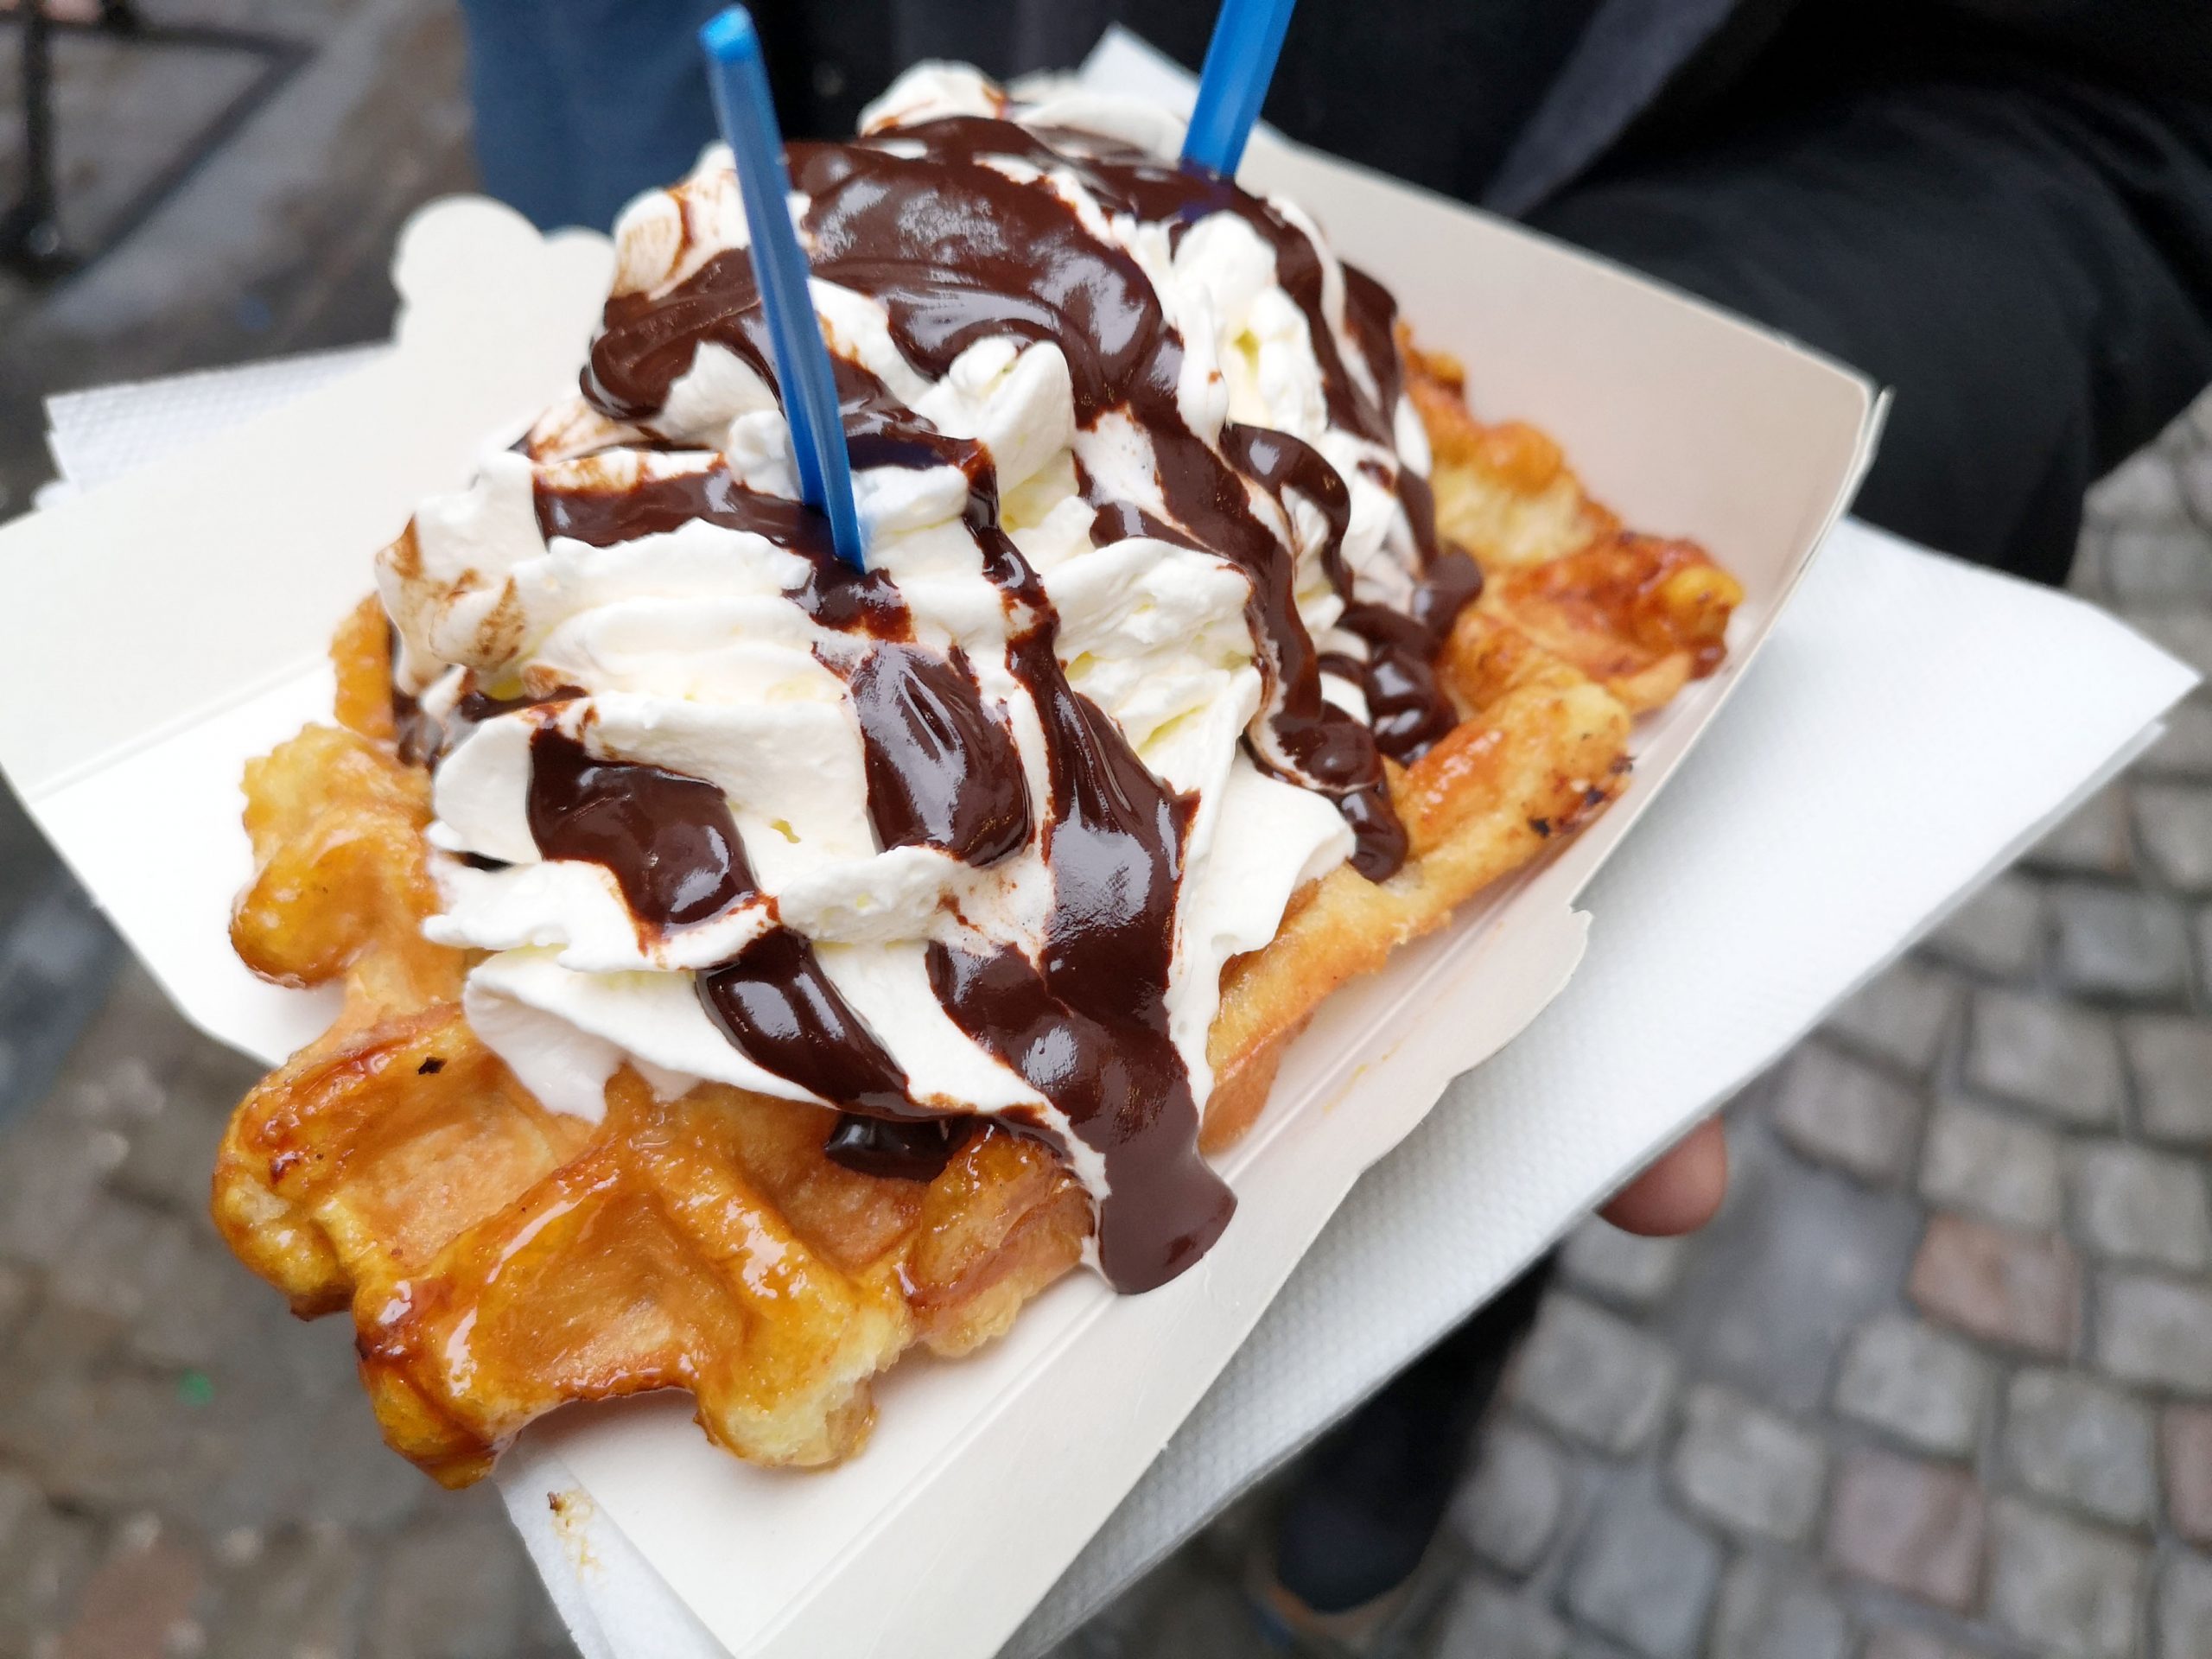 Waffles, the most popular sweets to eat in Brussels